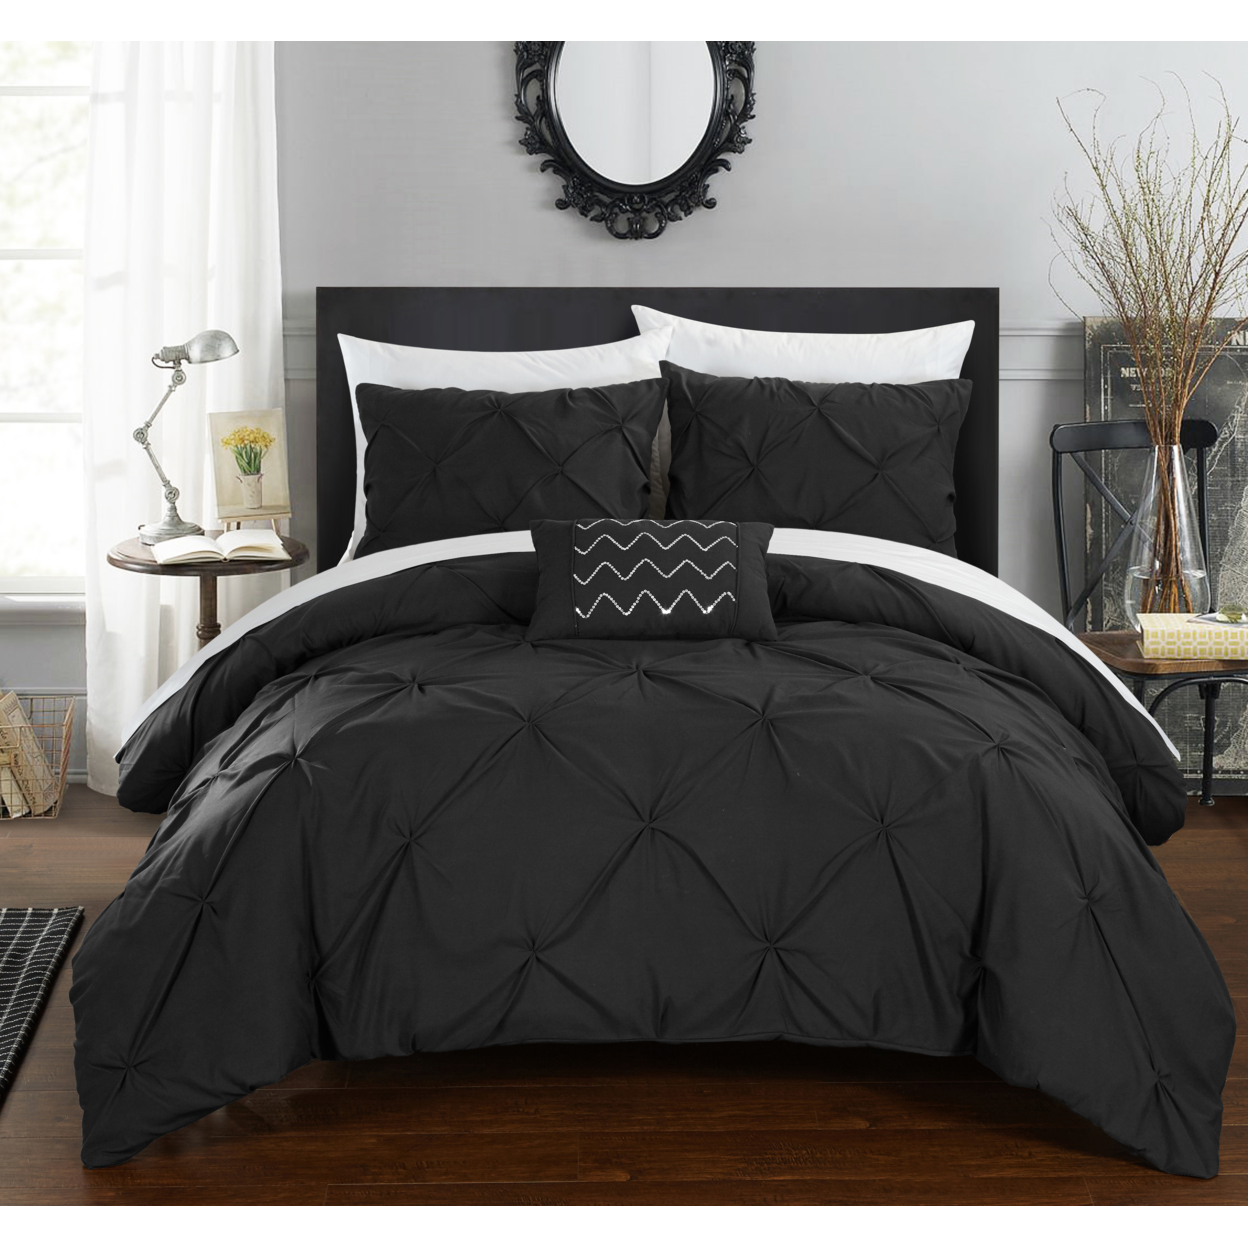 3 Or 4 Piece Whitley Pinch Pleated, Ruffled And Pleated Complete Duvet Cover Set Shams And Decorative Pillows Included - Black, Twin